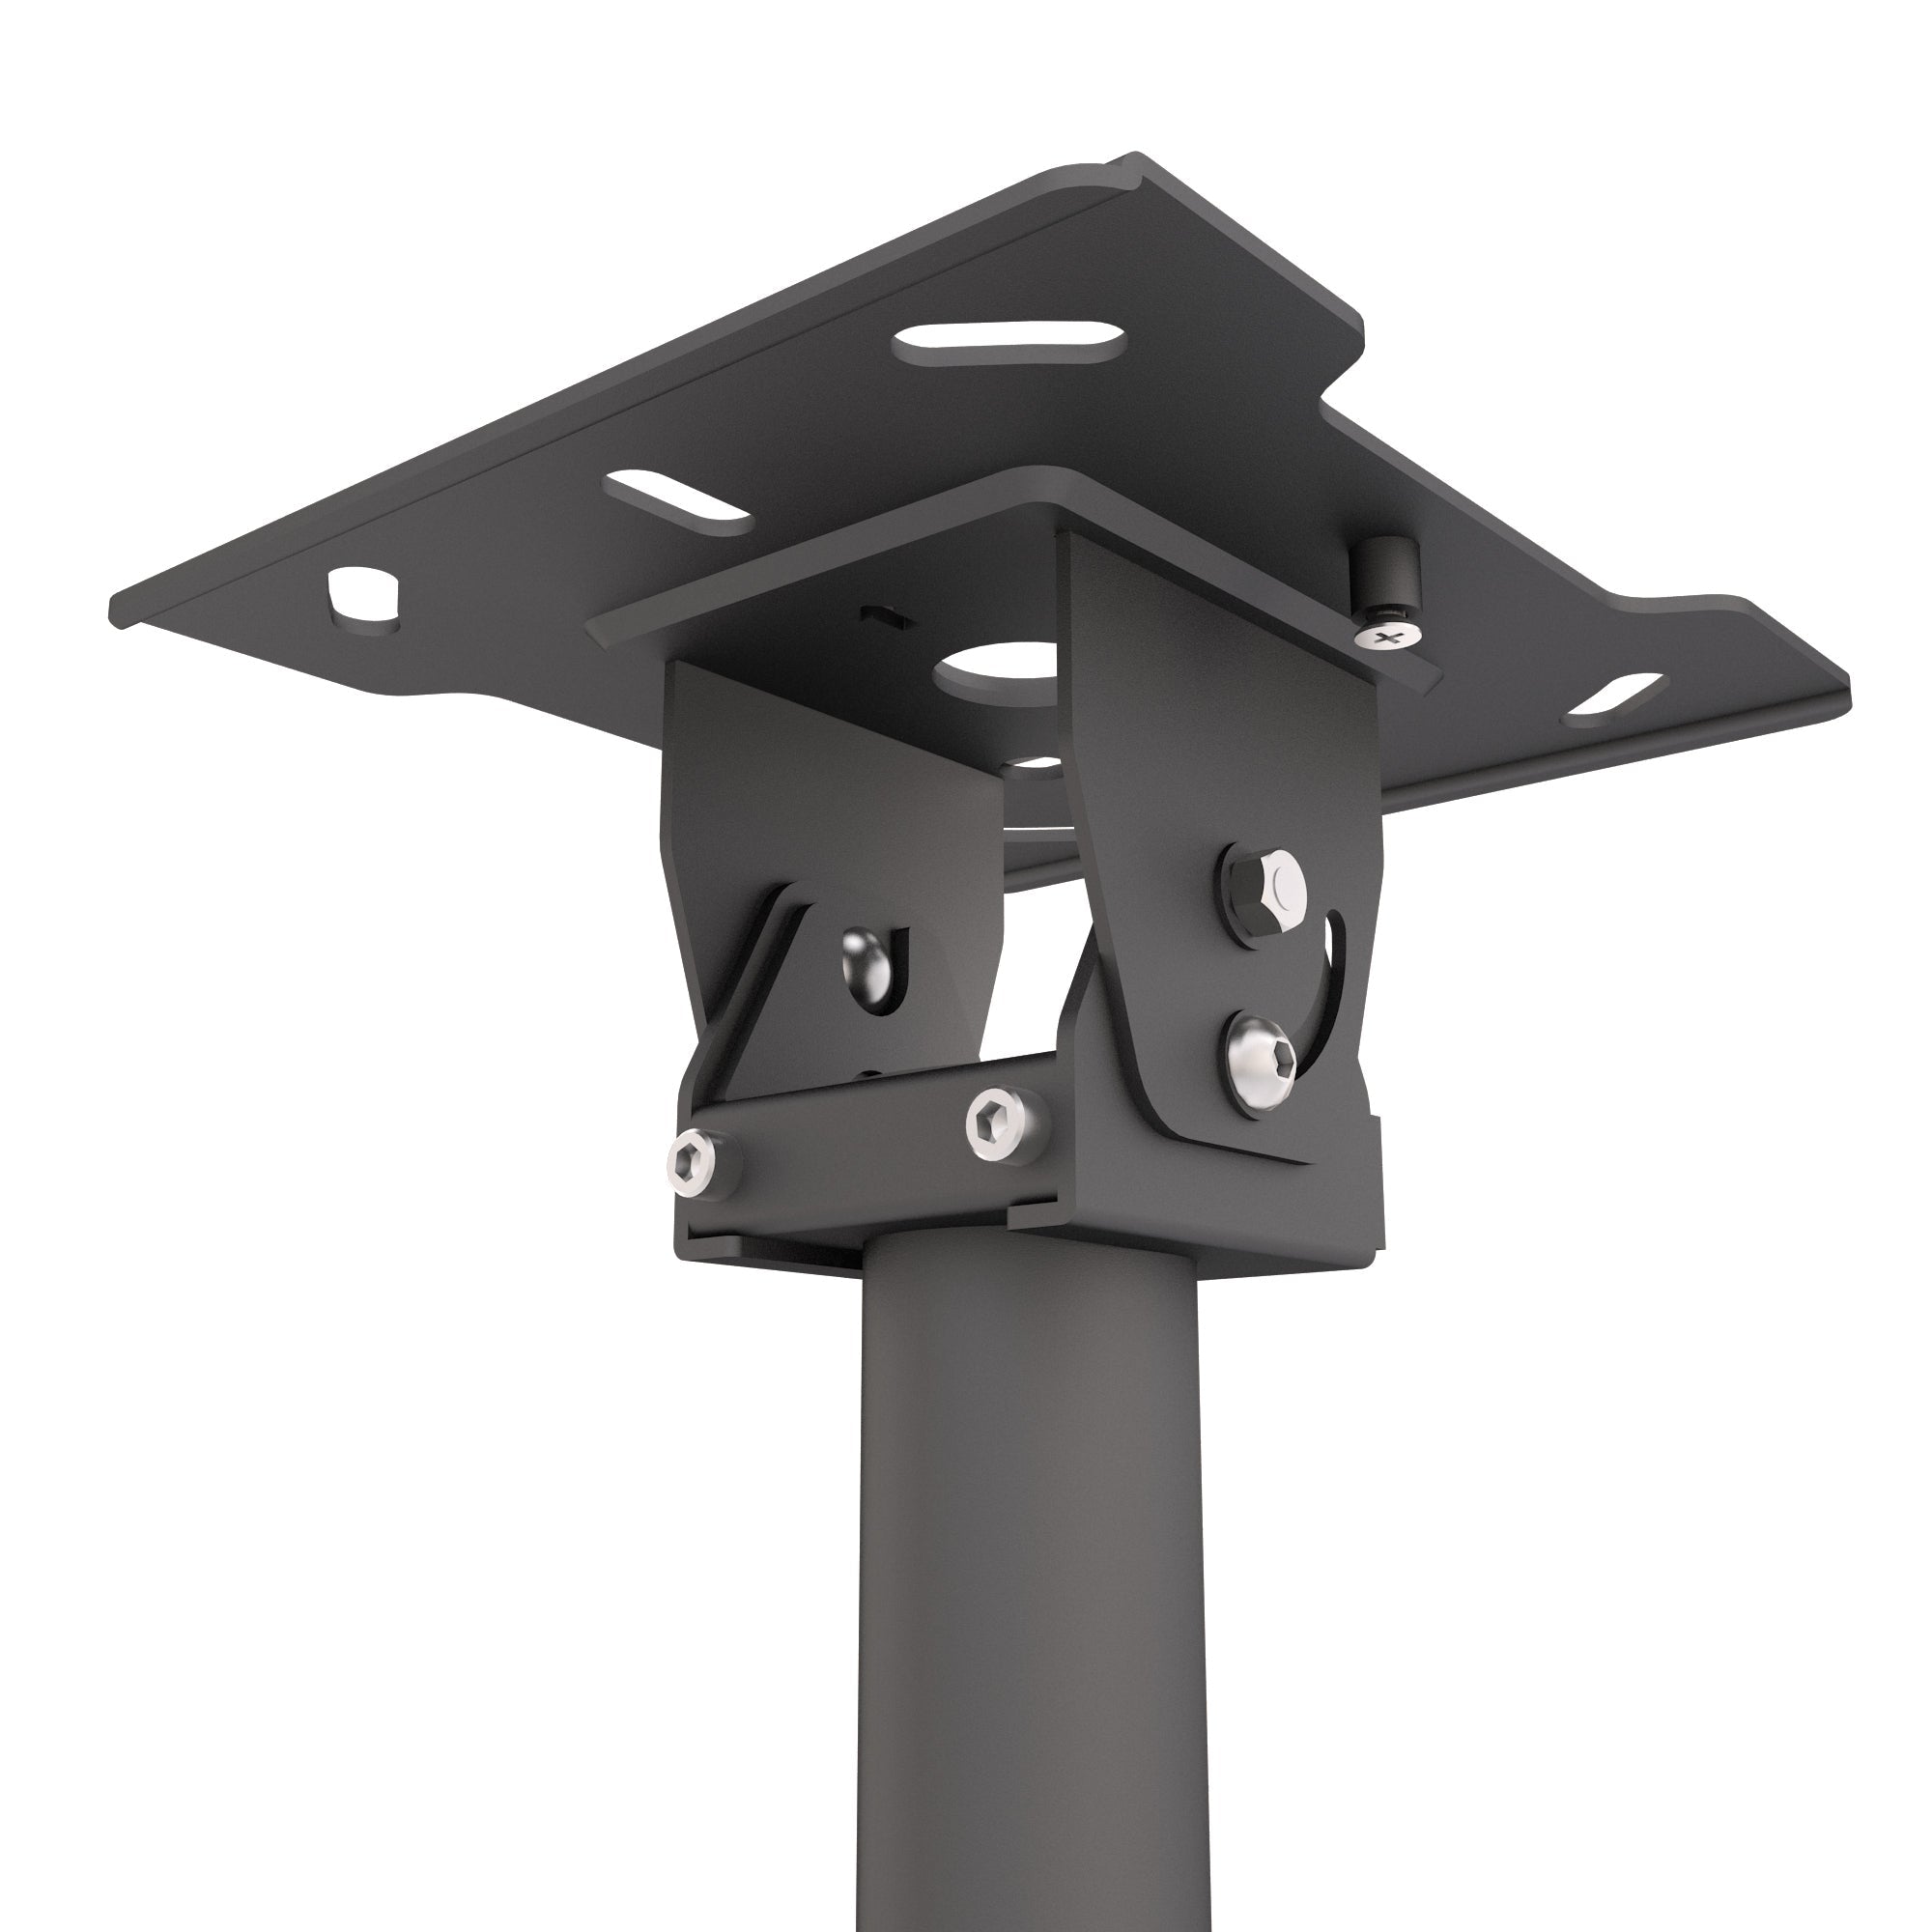 Kanto CM600SG Stainless Steel Outdoor Ceiling TV Mount for 37-inch to 70-inch TVs, Black